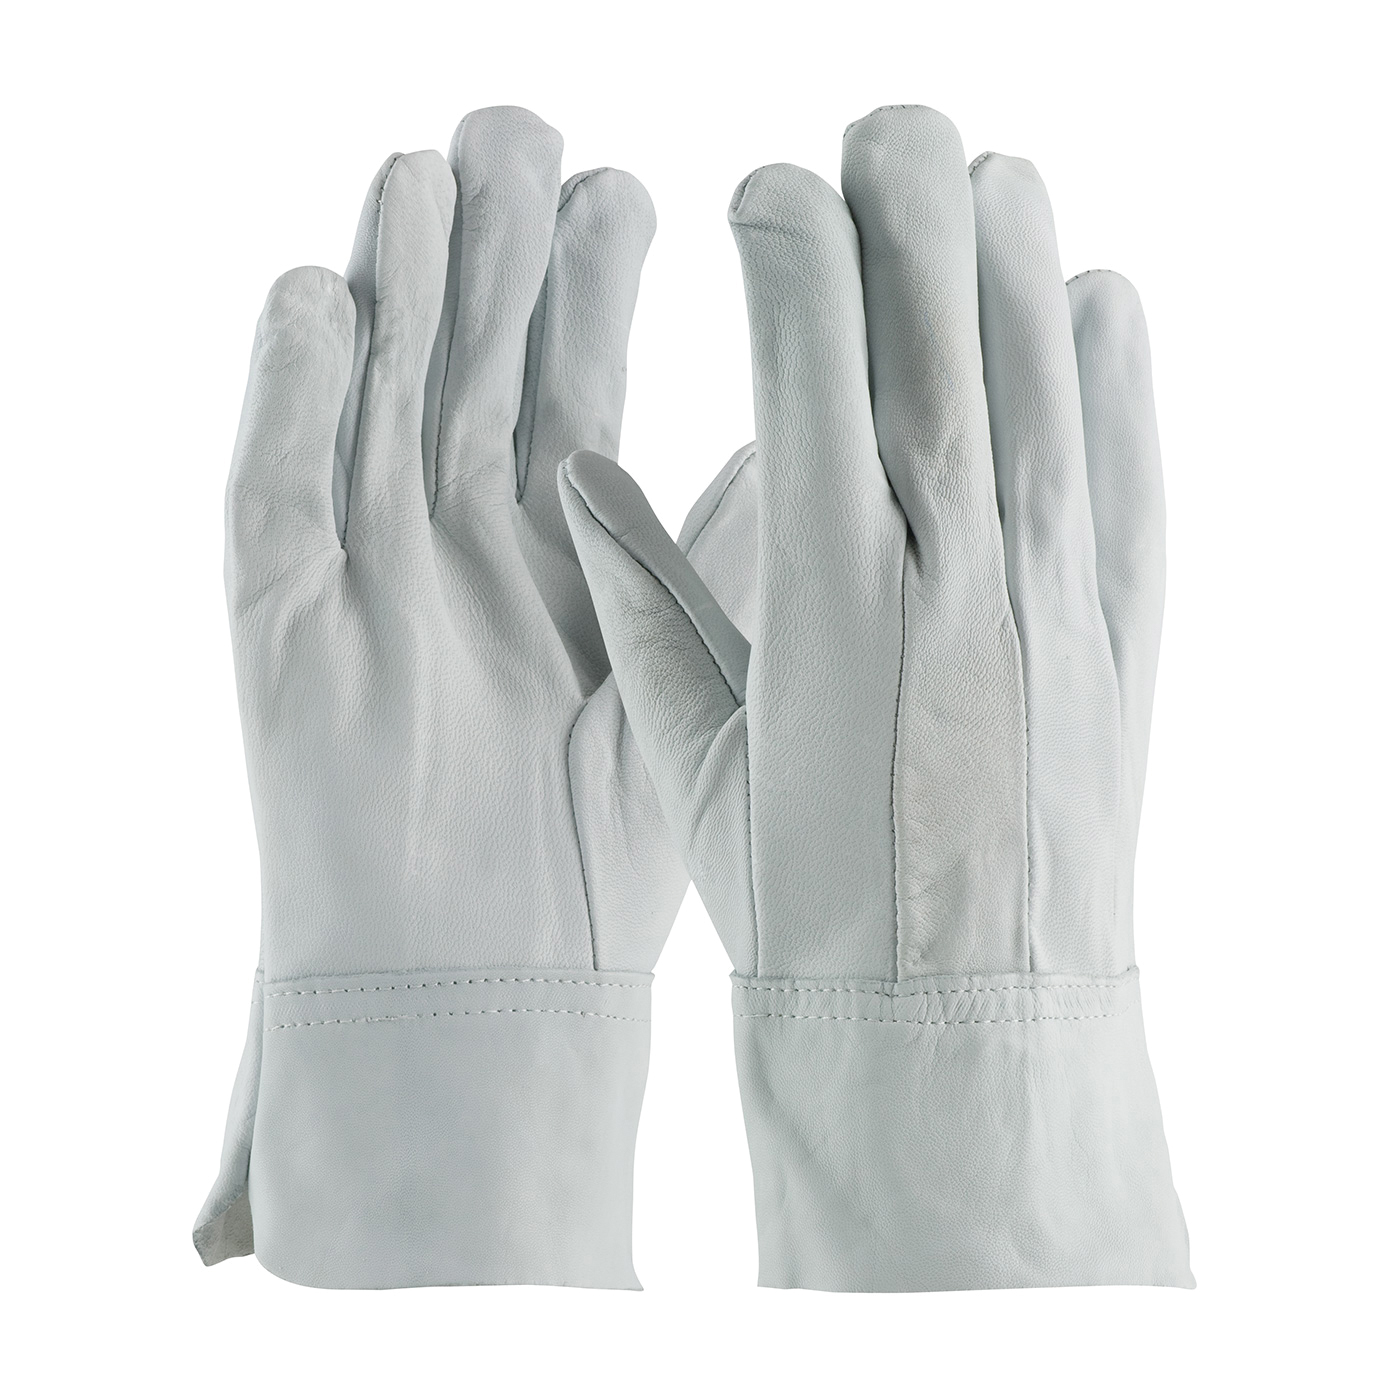 PIP® 75-4904/S MIG/TIG Welding Gloves, S, Top Grain Goat Skin Leather, Gray, Unlined Lining, Band Top/Slip-On Cuff, 9.3 in L, 1.1 mm THK Glove Material